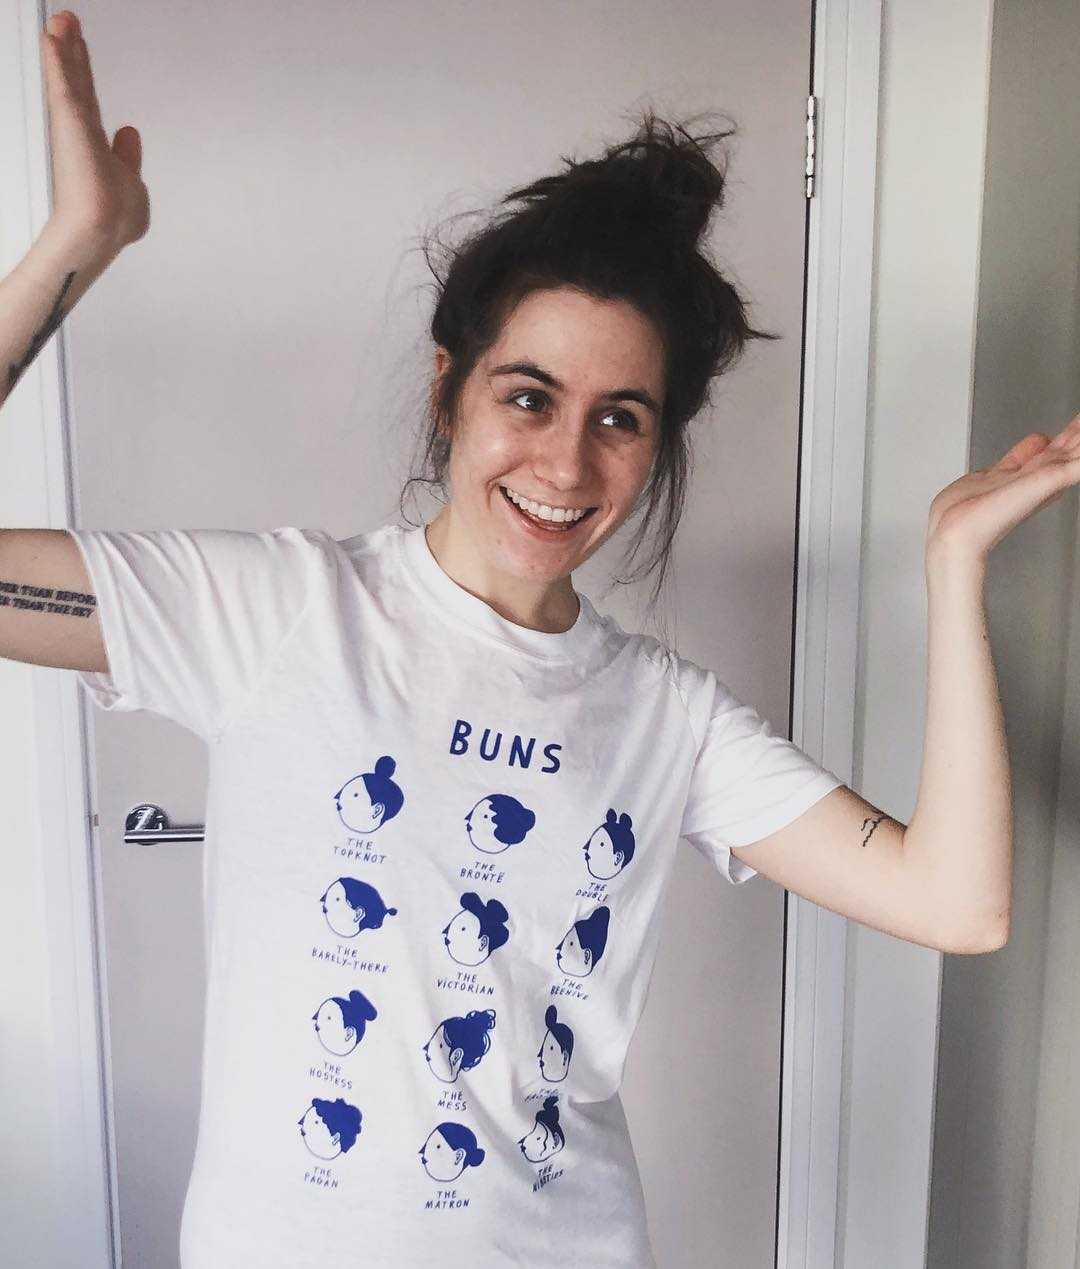 51 Hottest Dodie Big Butt Pictures Demonstrate That She Has Most Sweltering Legs 32